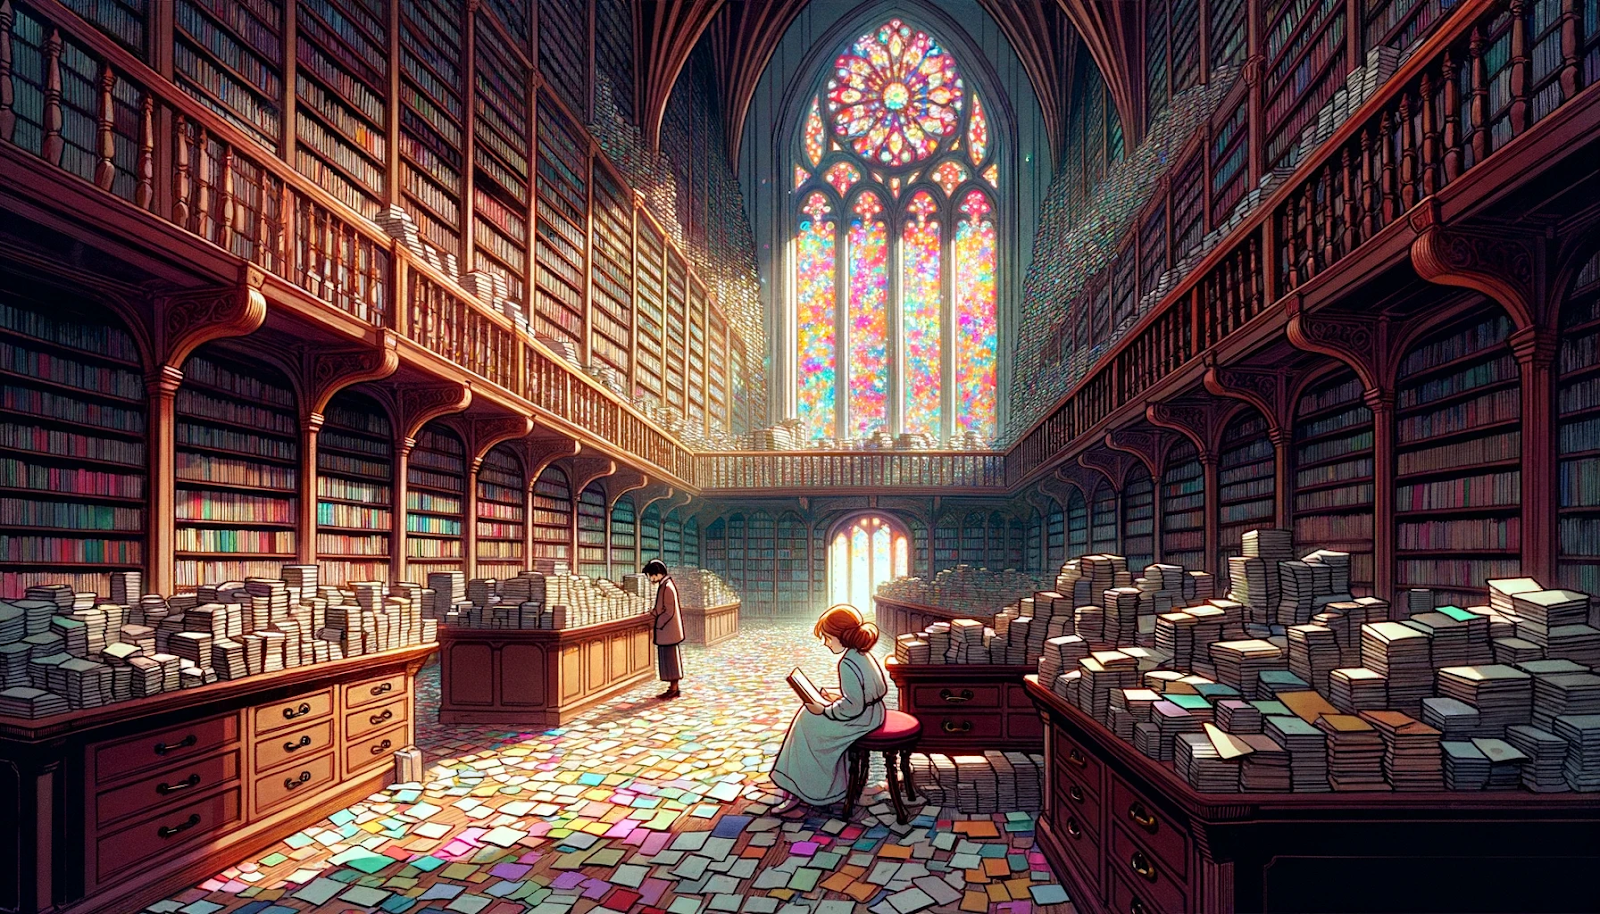 Illustration of the vast interior of the Library of Unwritten Letters. Erin sits near a stained-glass window, the colorful light from it painting the floor. Letters are piled high on mahogany tables and fill countless shelves. Mia, with a few letters in her hand, approaches Erin, showing concern.